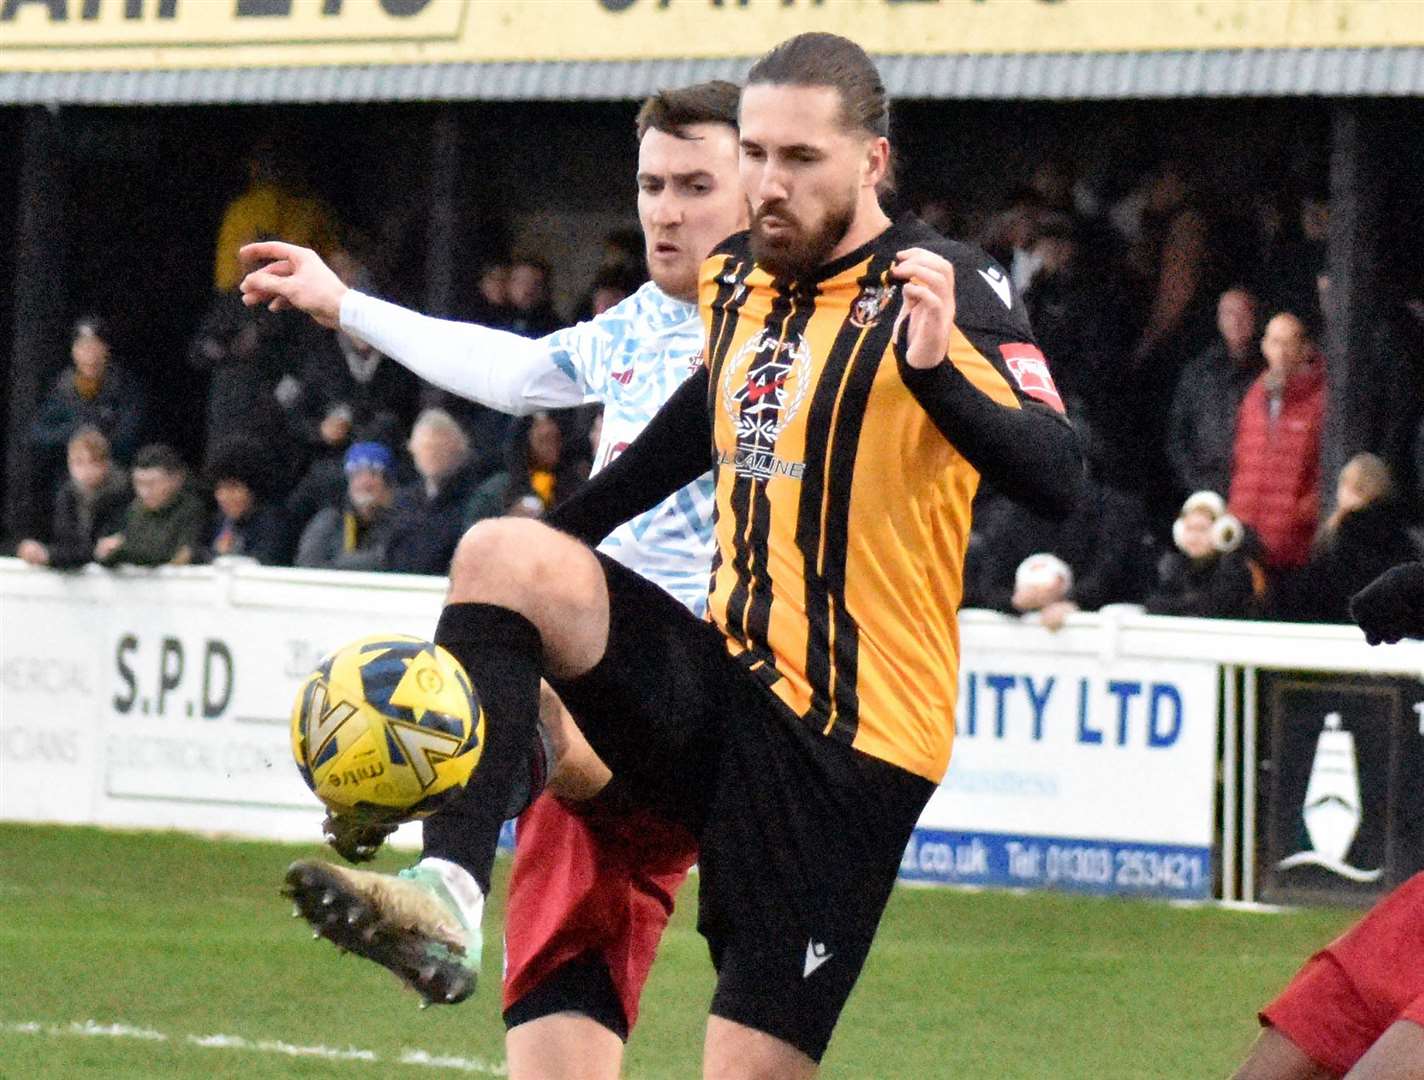 Folkestone forward Tom Derry’s first-half double helped them to earn a 3-3 home draw against Carshalton. Picture: Randolph File